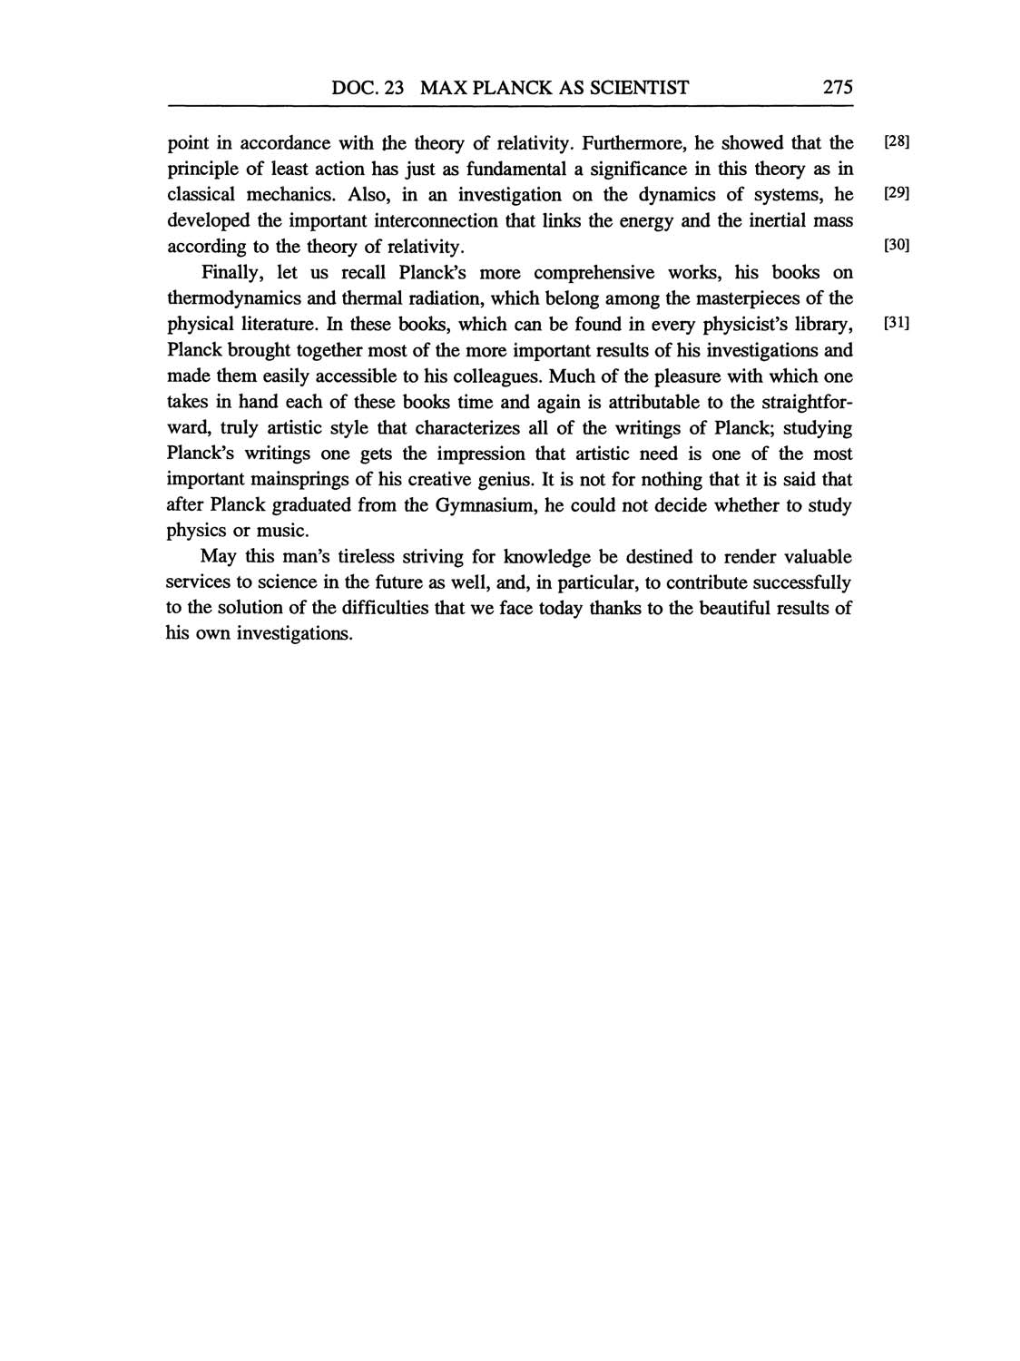 Volume 4: The Swiss Years: Writings 1912-1914 (English translation supplement) page 275